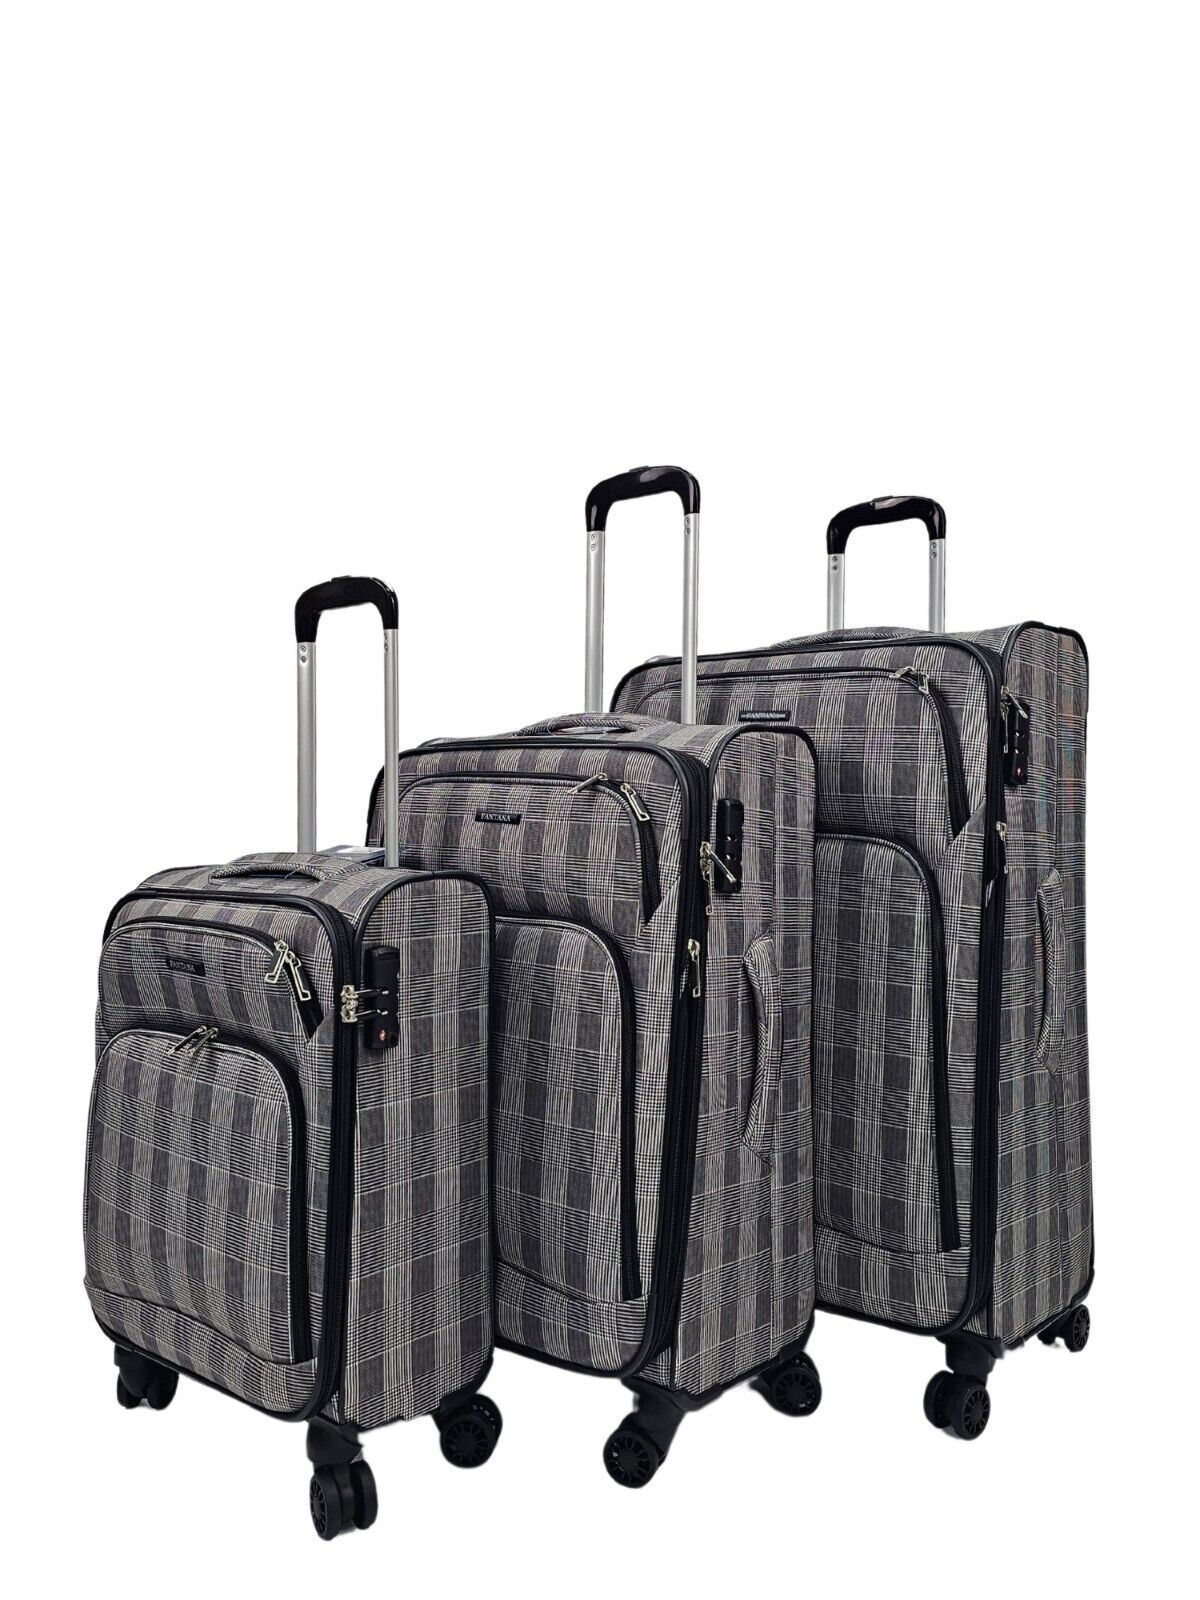 Ashville Set of 3 Soft Shell Suitcase in Stripe